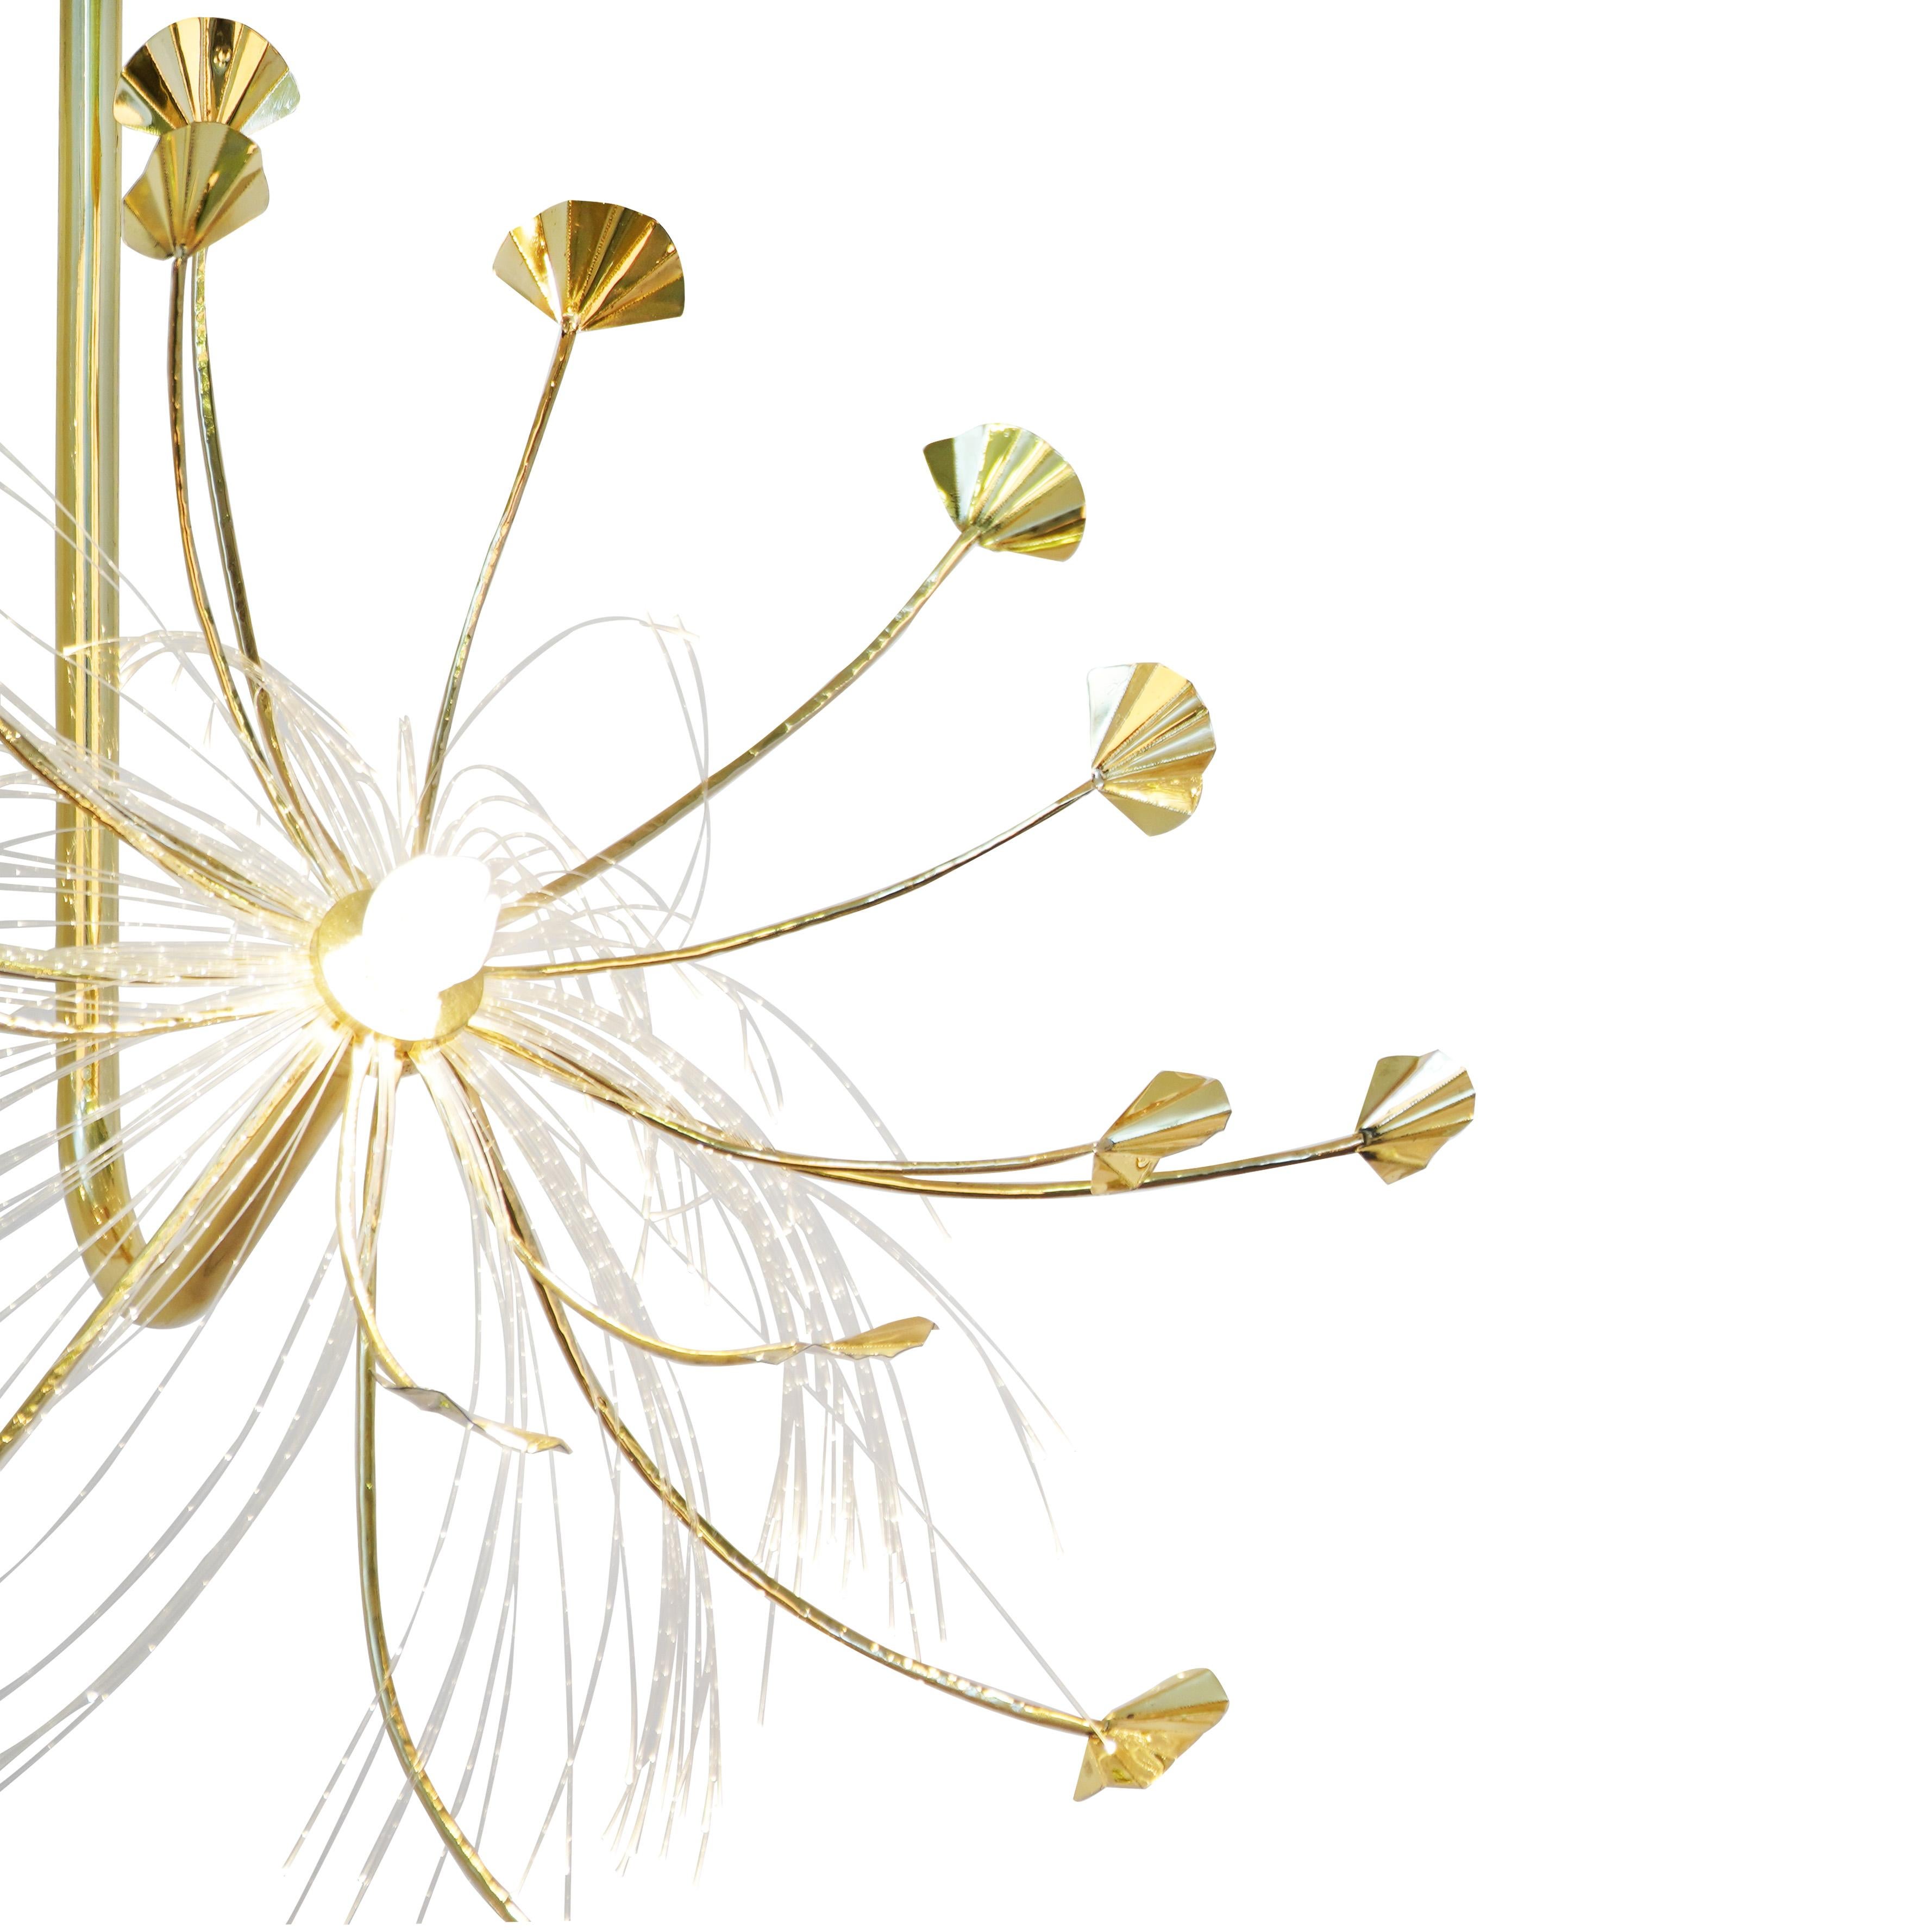 One masterpiece.

Echoing the graceful shape of blossoming dandelion flowers, Wish pendant brings ethereal beauty with the myriad of pathways of the optic fibers. Marvel at these delicate blooms to light up amazing corners home.

Its ethereal